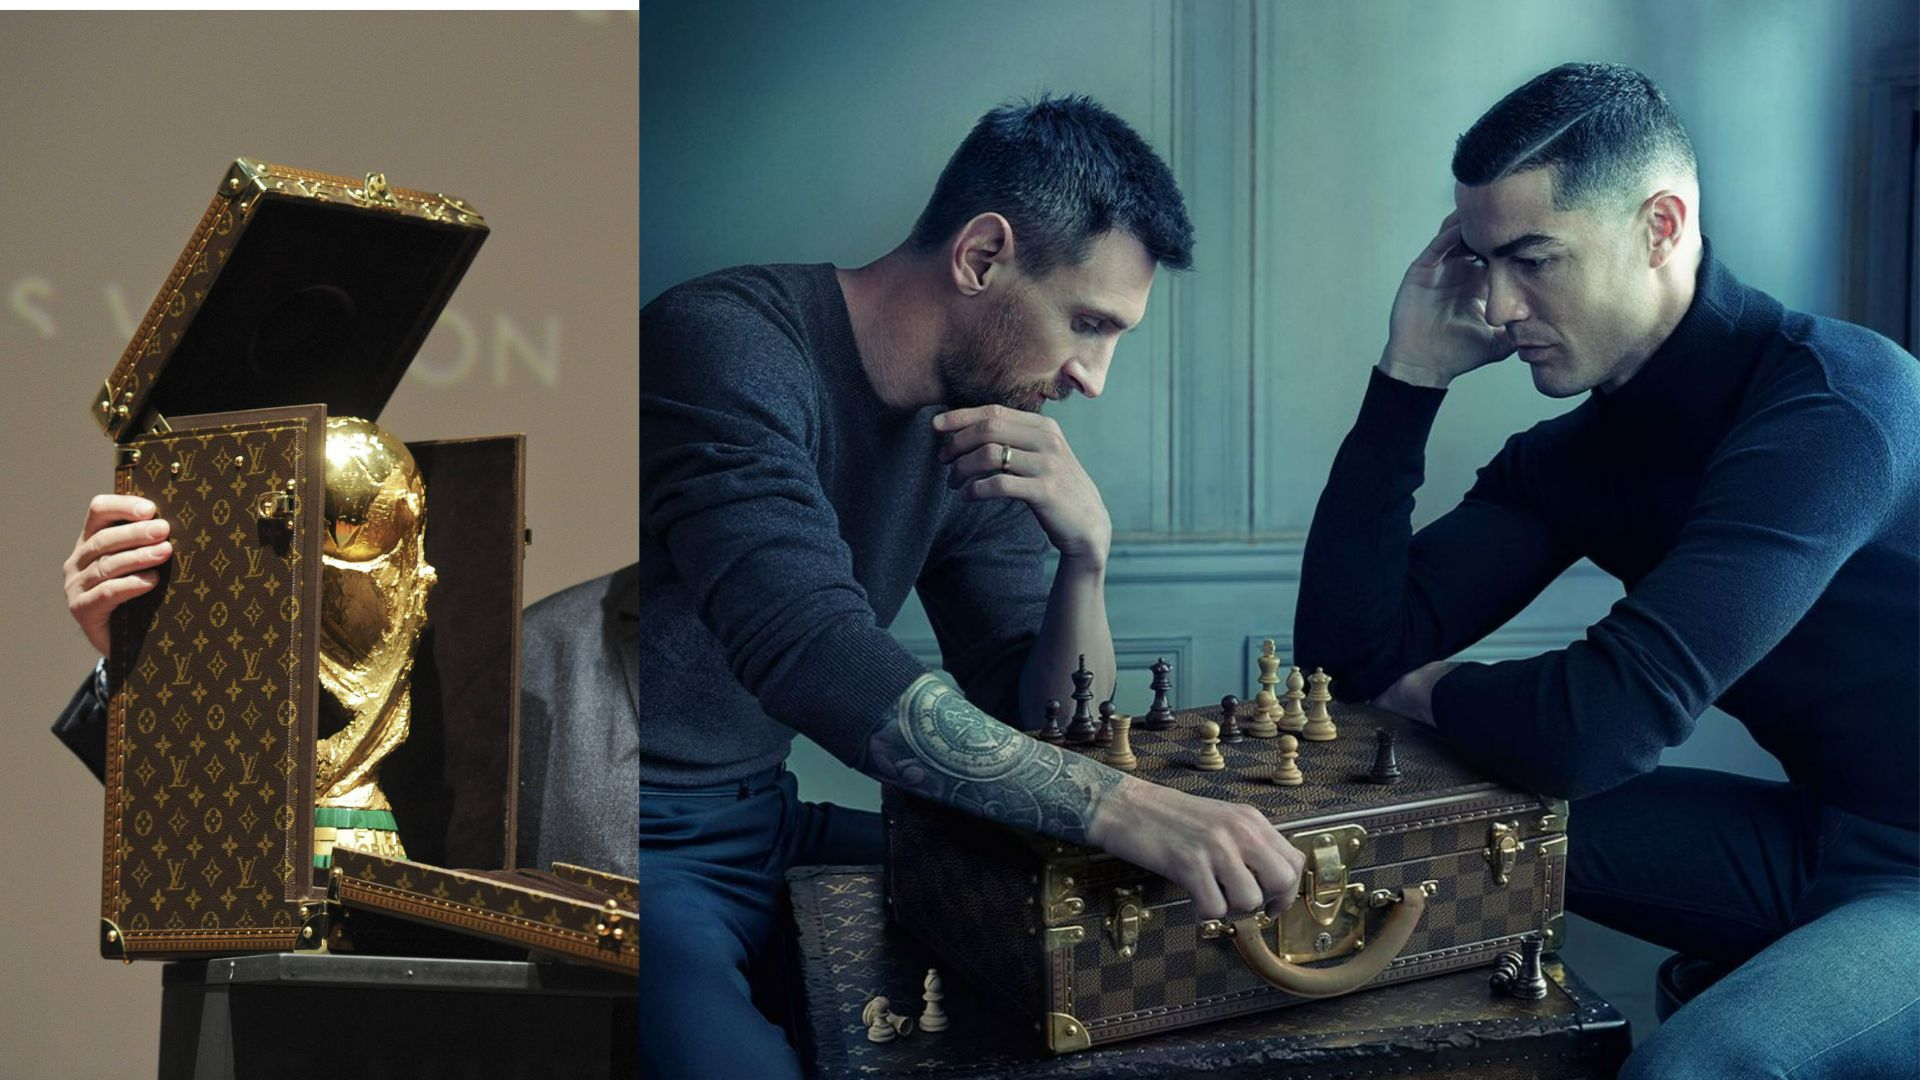 Twitter Reacts to Cristiano Ronaldo and Lionel Messi's Louis Vuitton  Campaign